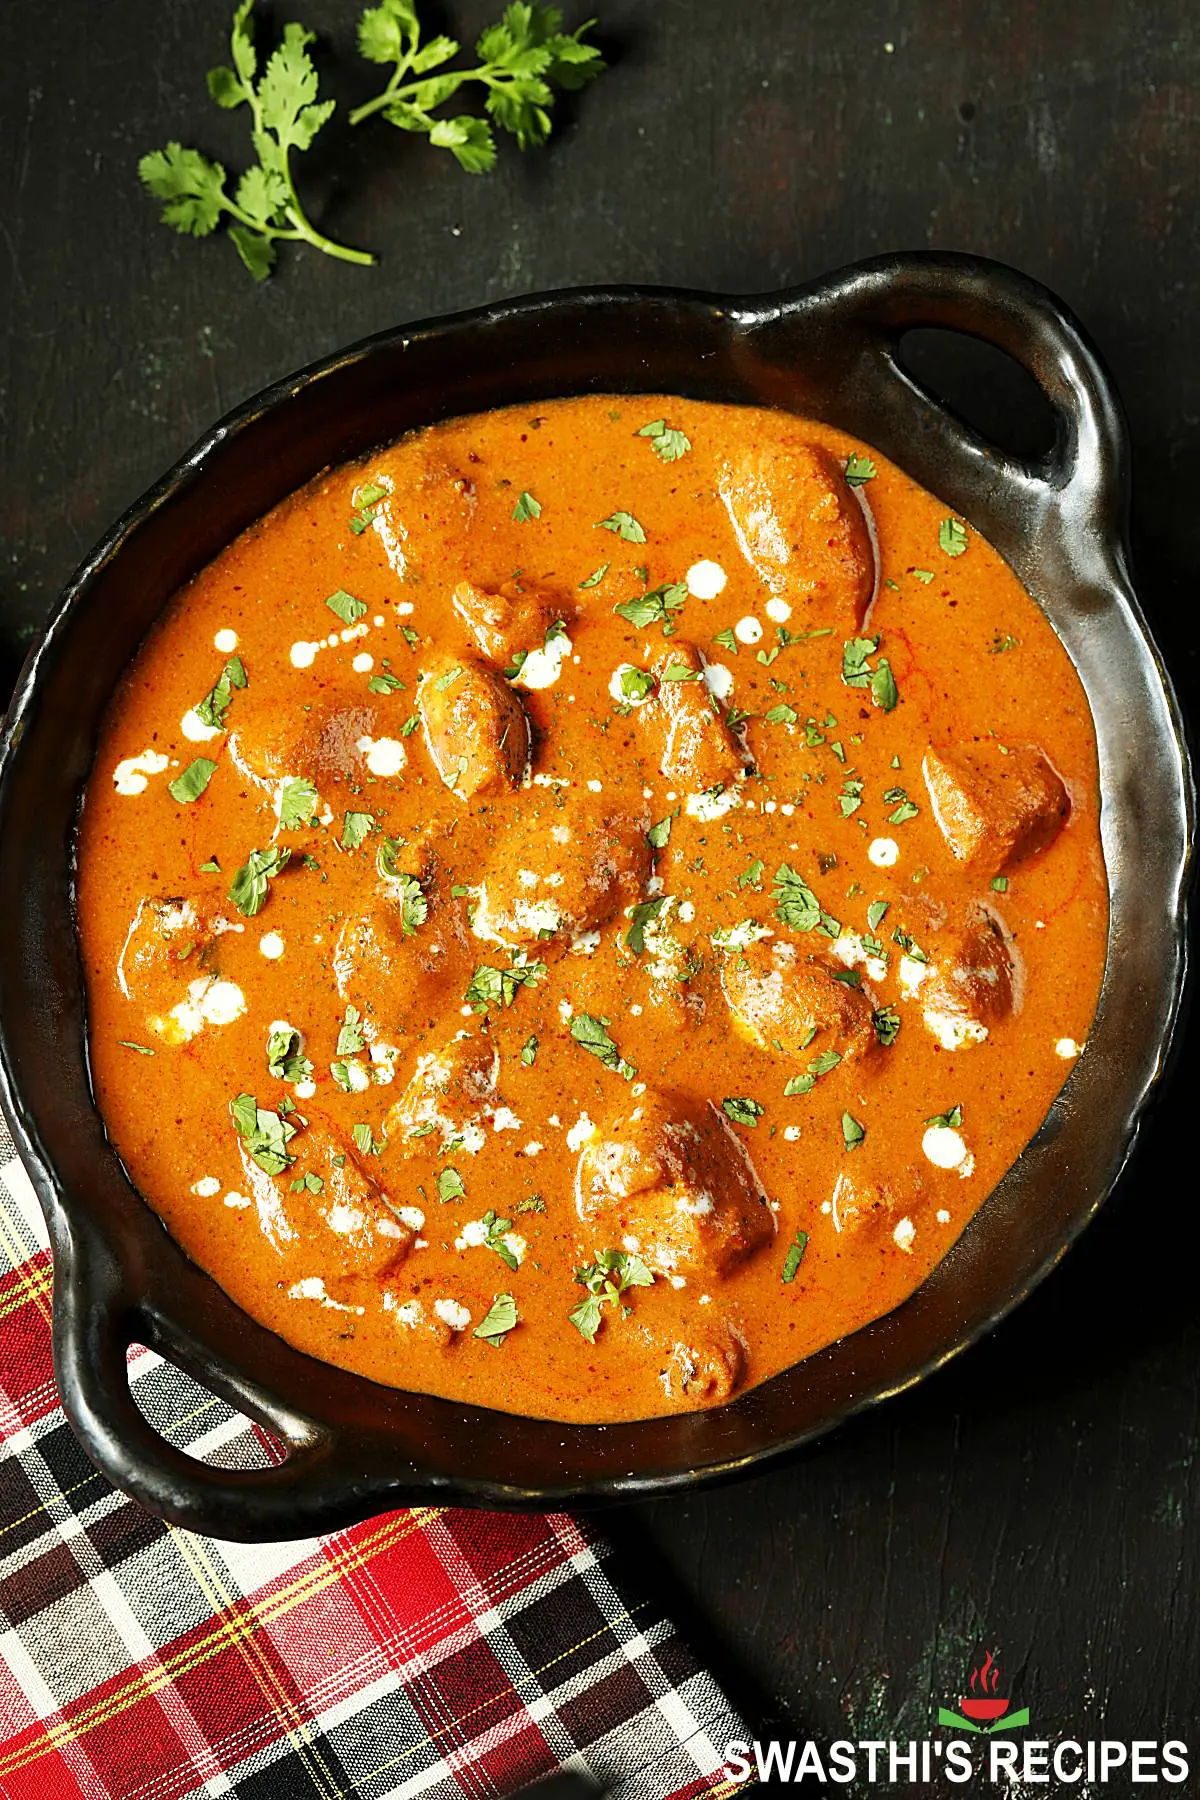 Butter Chicken Recipe (Chicken Makhani) - Swasthi's Recipes